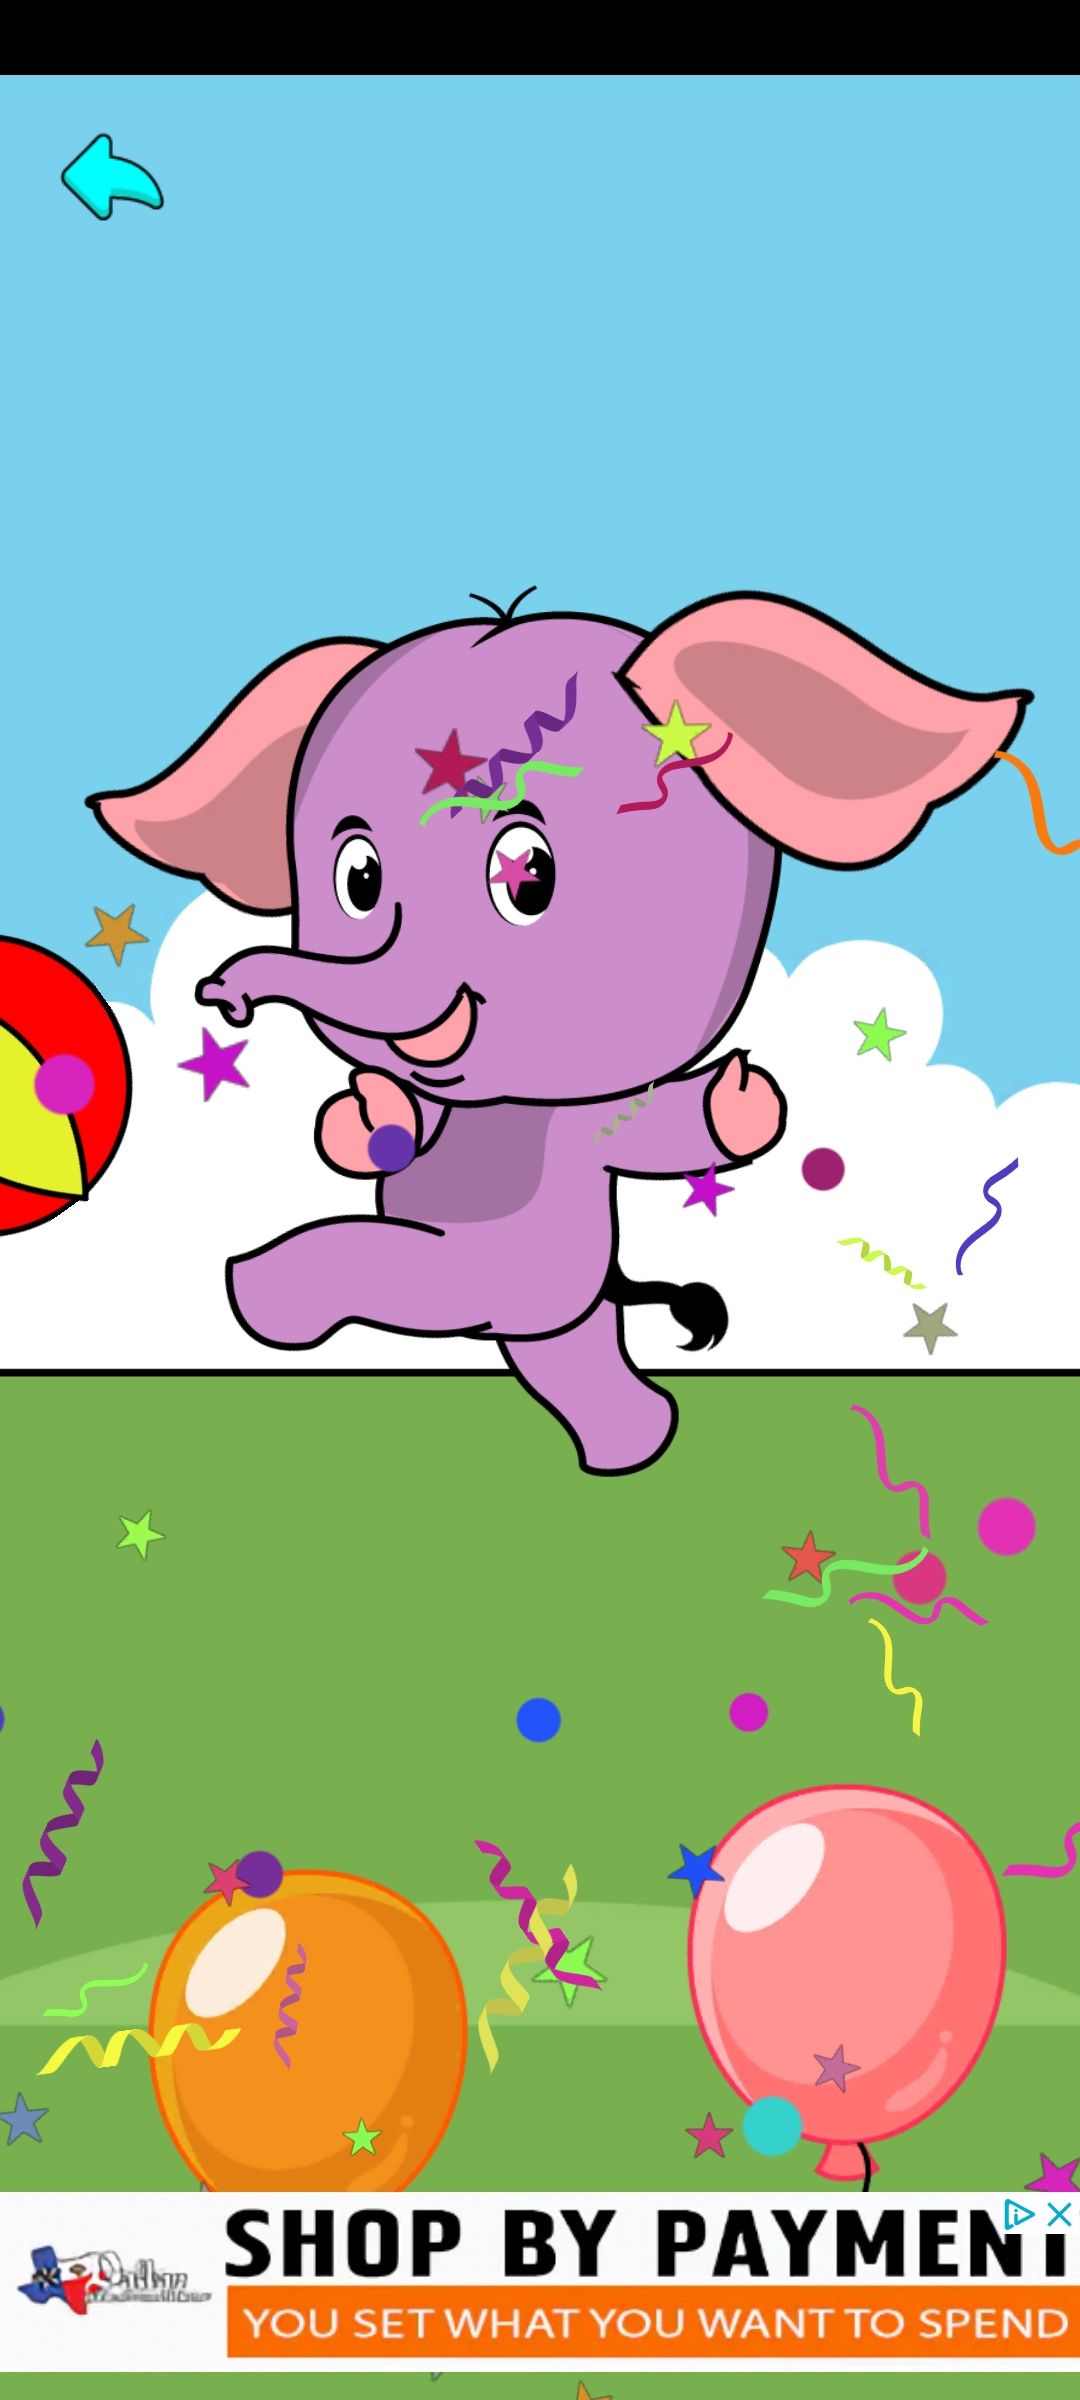 coloring book games app finished picture of a purple elephant